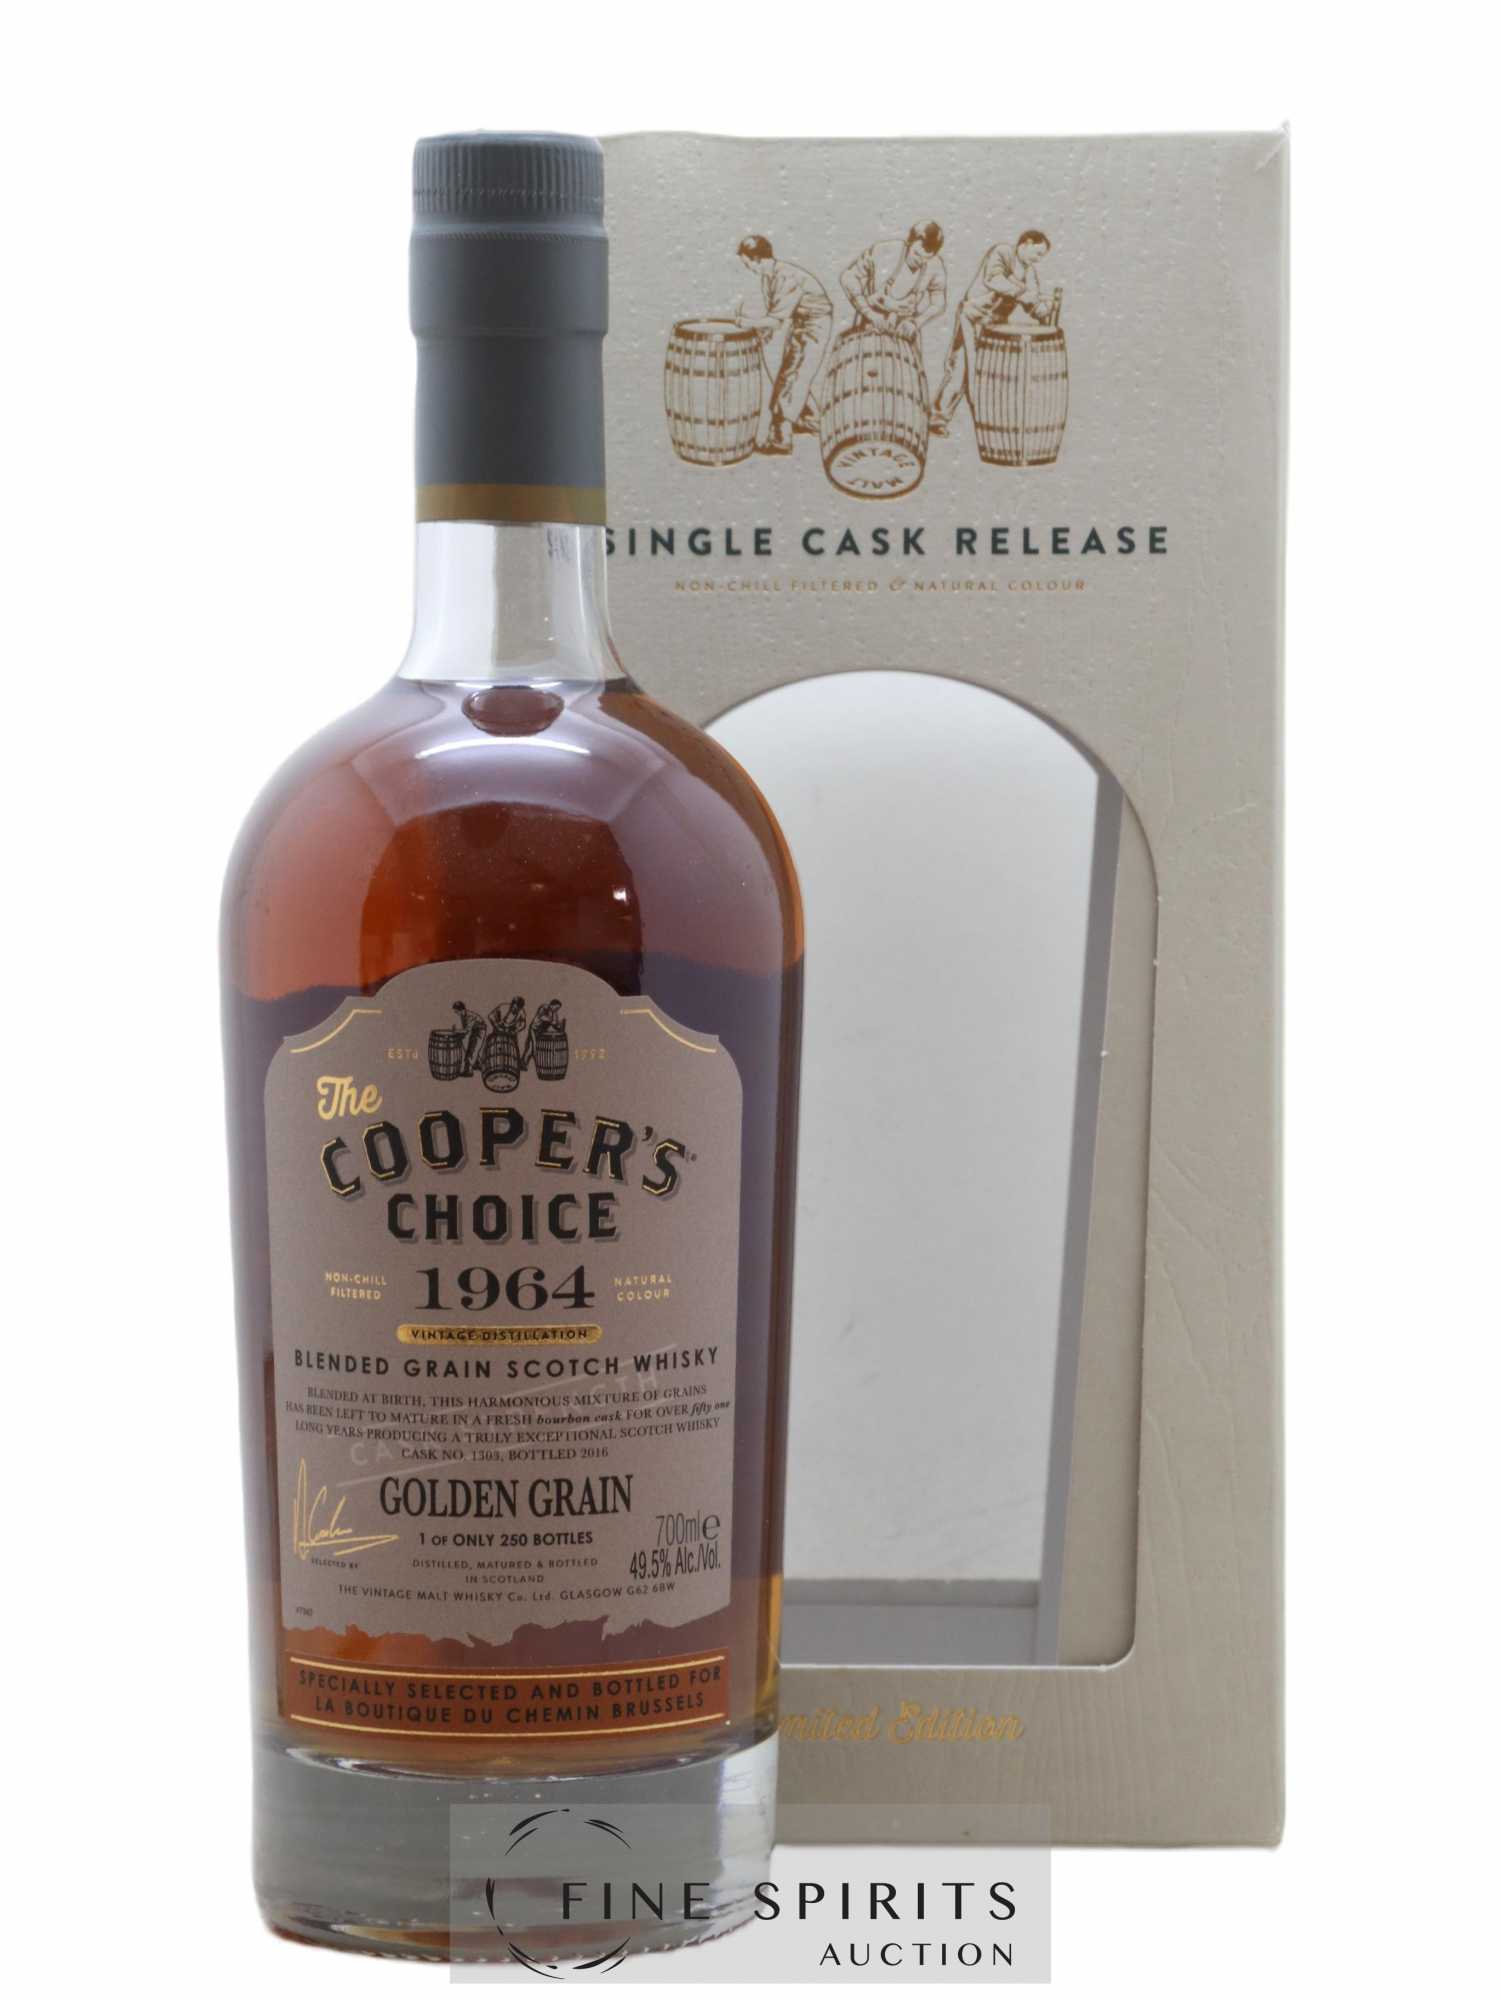 Golden Grain 51 years 1964 Of. The Cooper's Choice Cask n°1303 - One of 250 - bottled 2016 La Boutique du Ch 